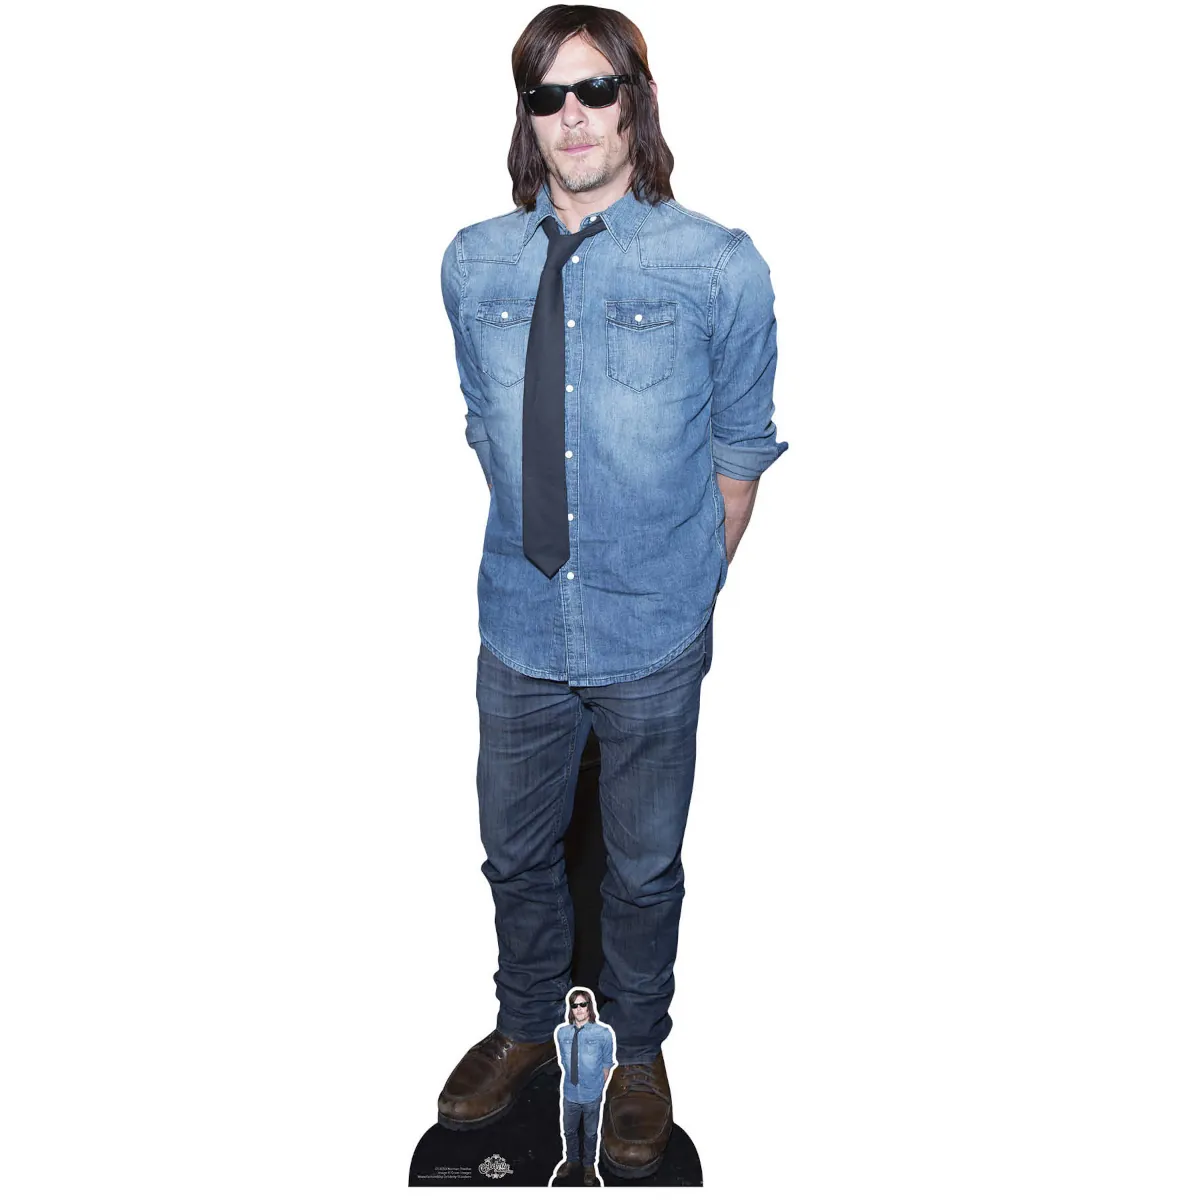 CS1059 Norman Reedus 'Casual' (American Actor) Lifesize + Mini Cardboard Cutout Standee Front